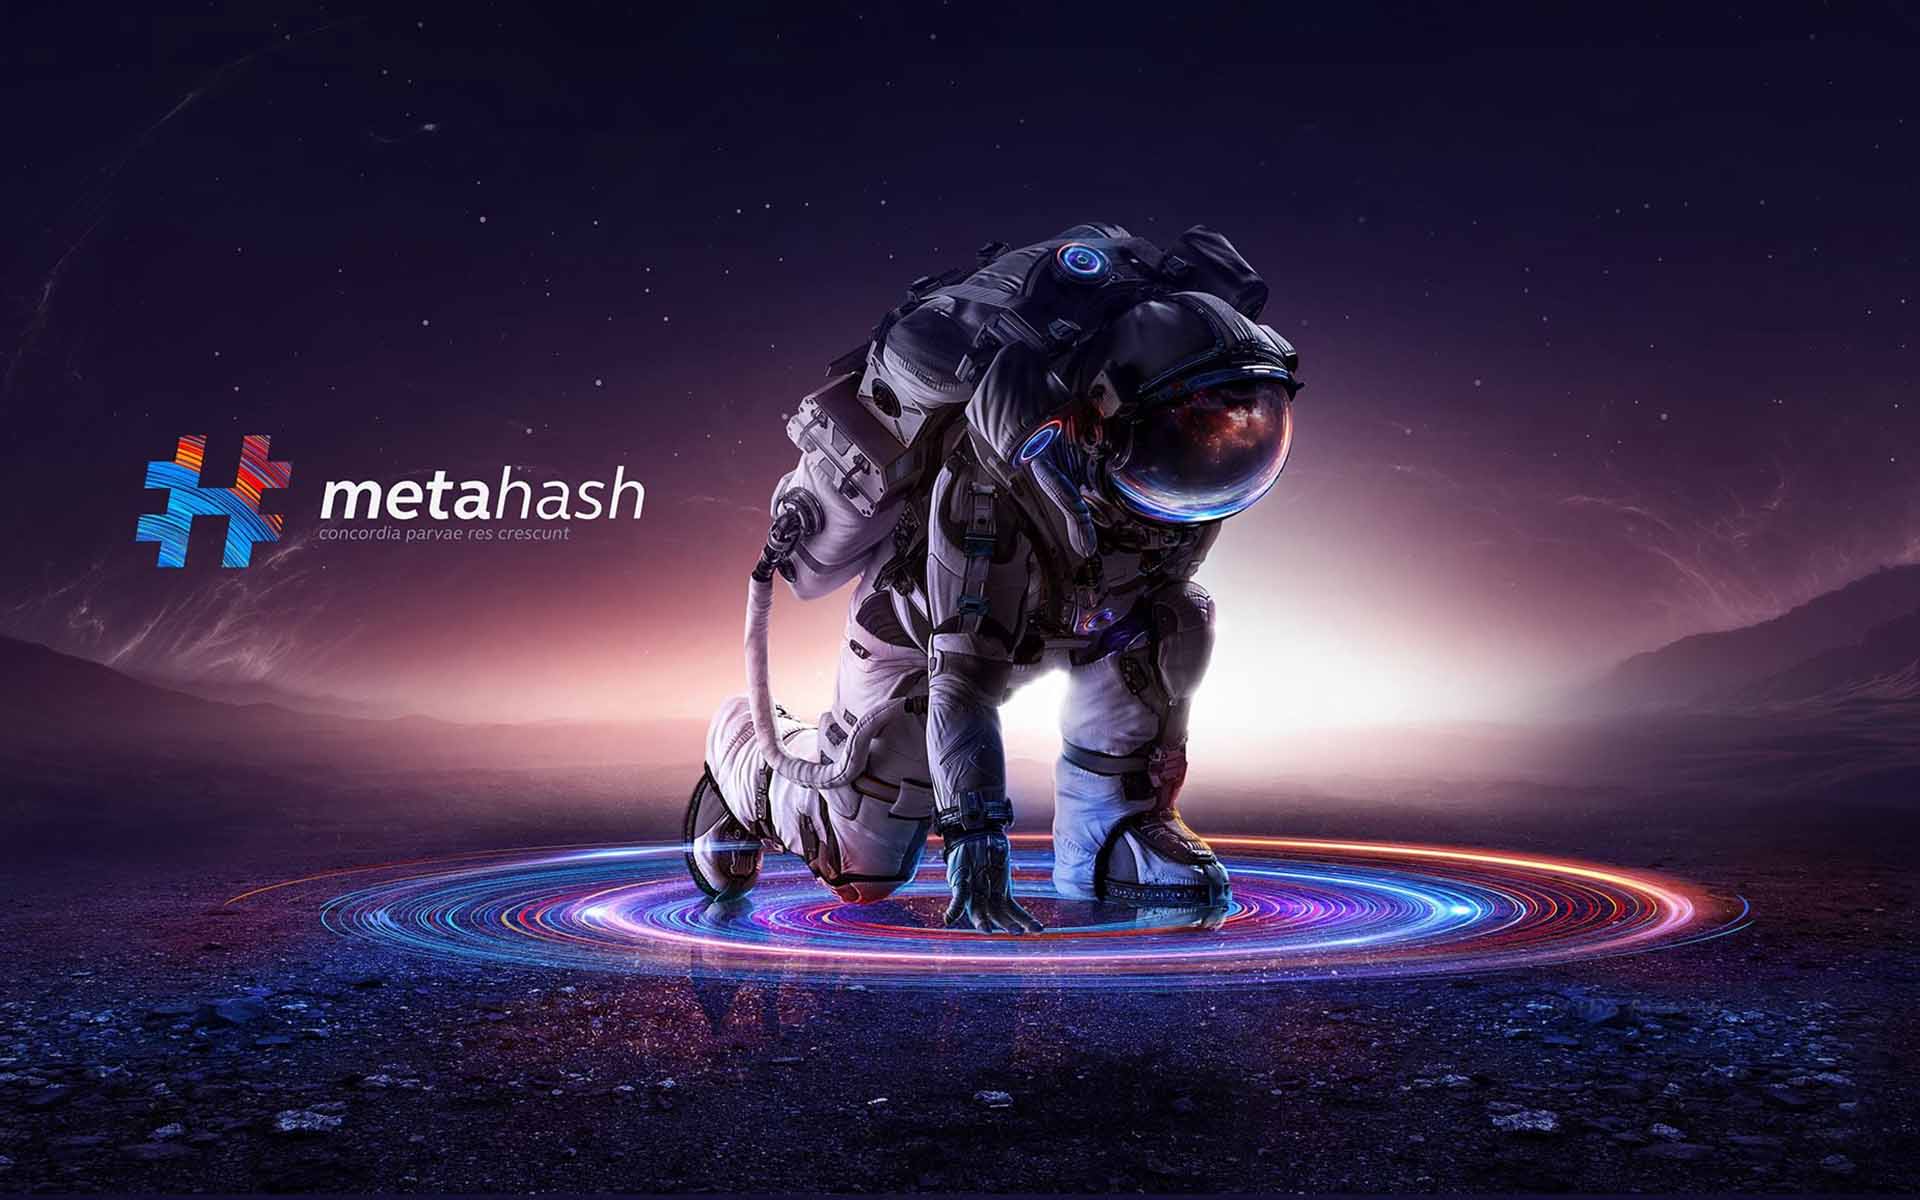 #MetaHash: A Revolutionary Payment and Decentralized Data Storage System?